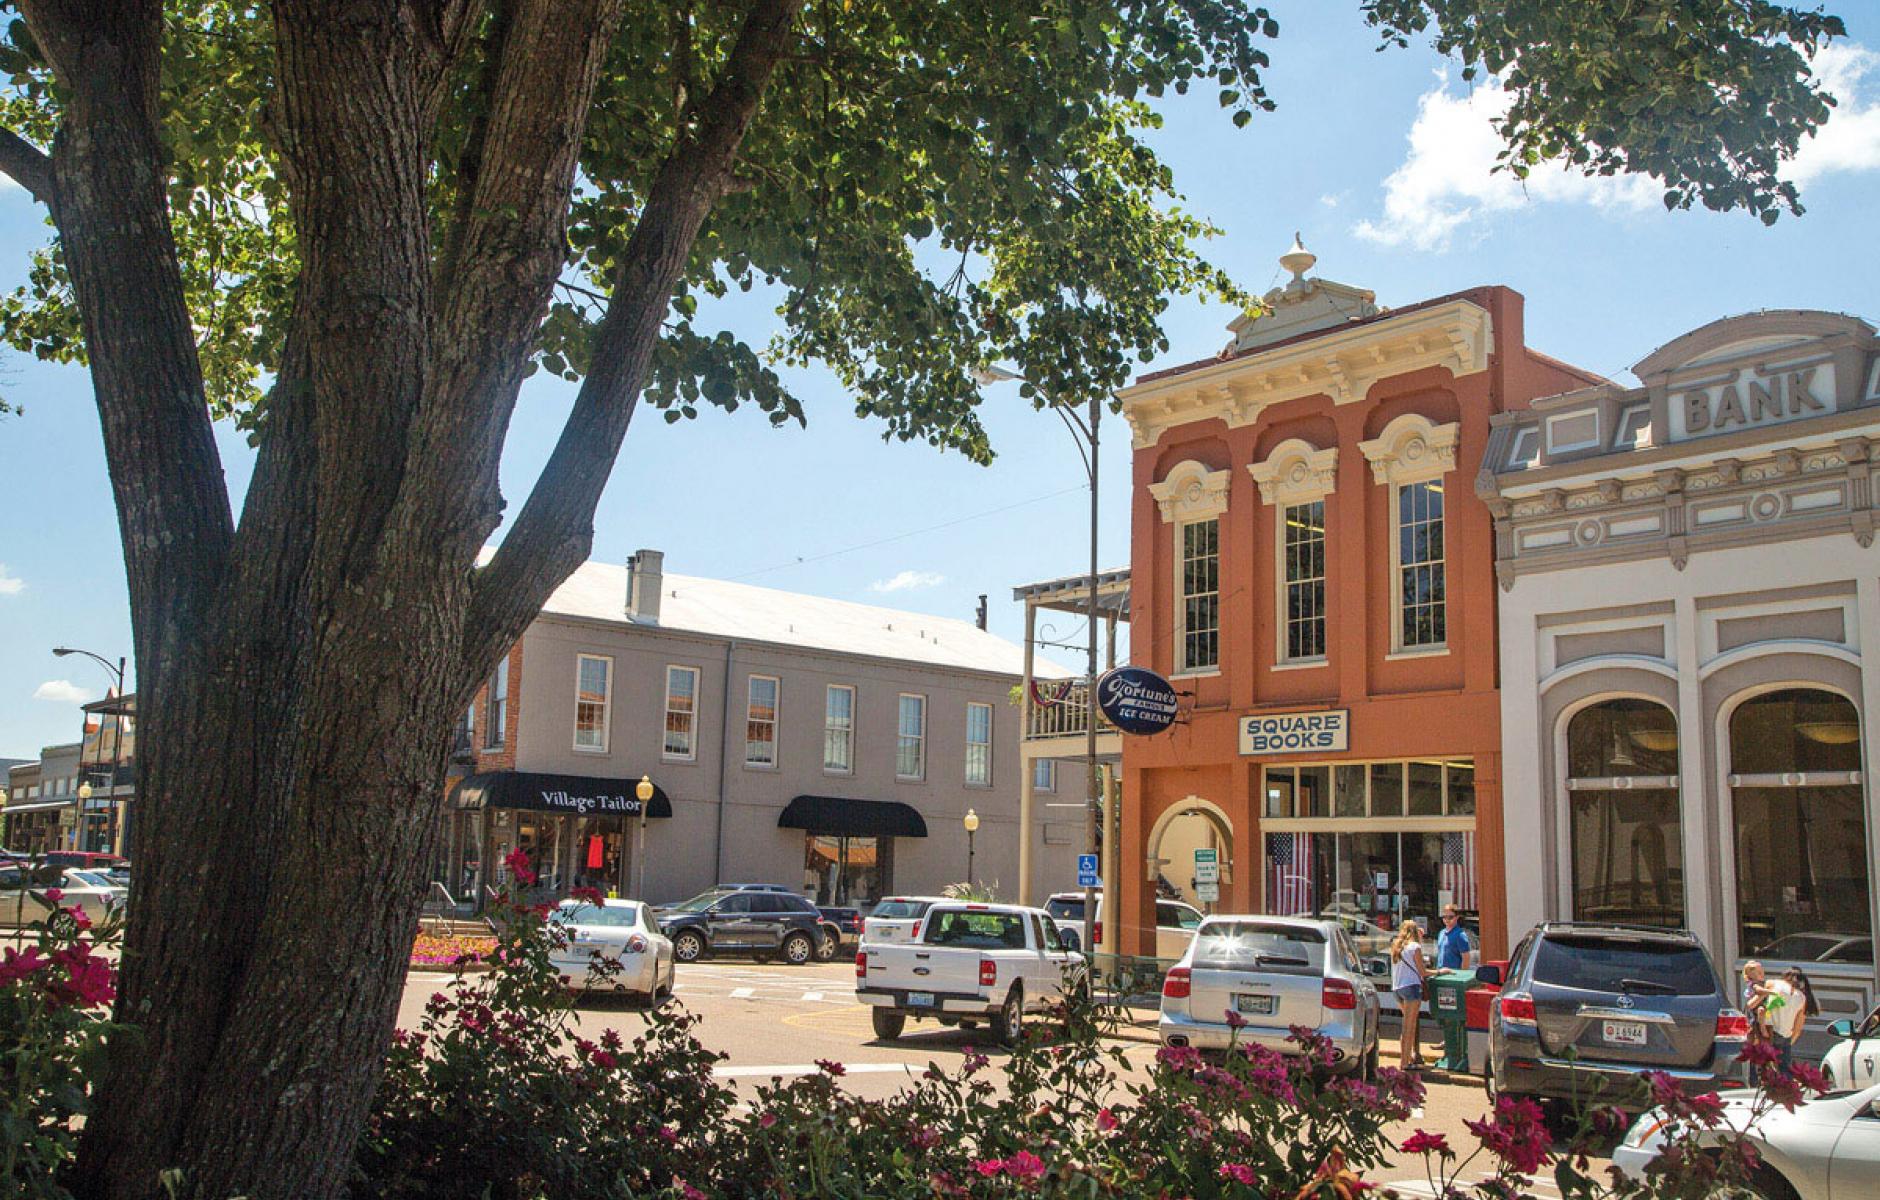 People and placemaking potential of small downtowns | CNU